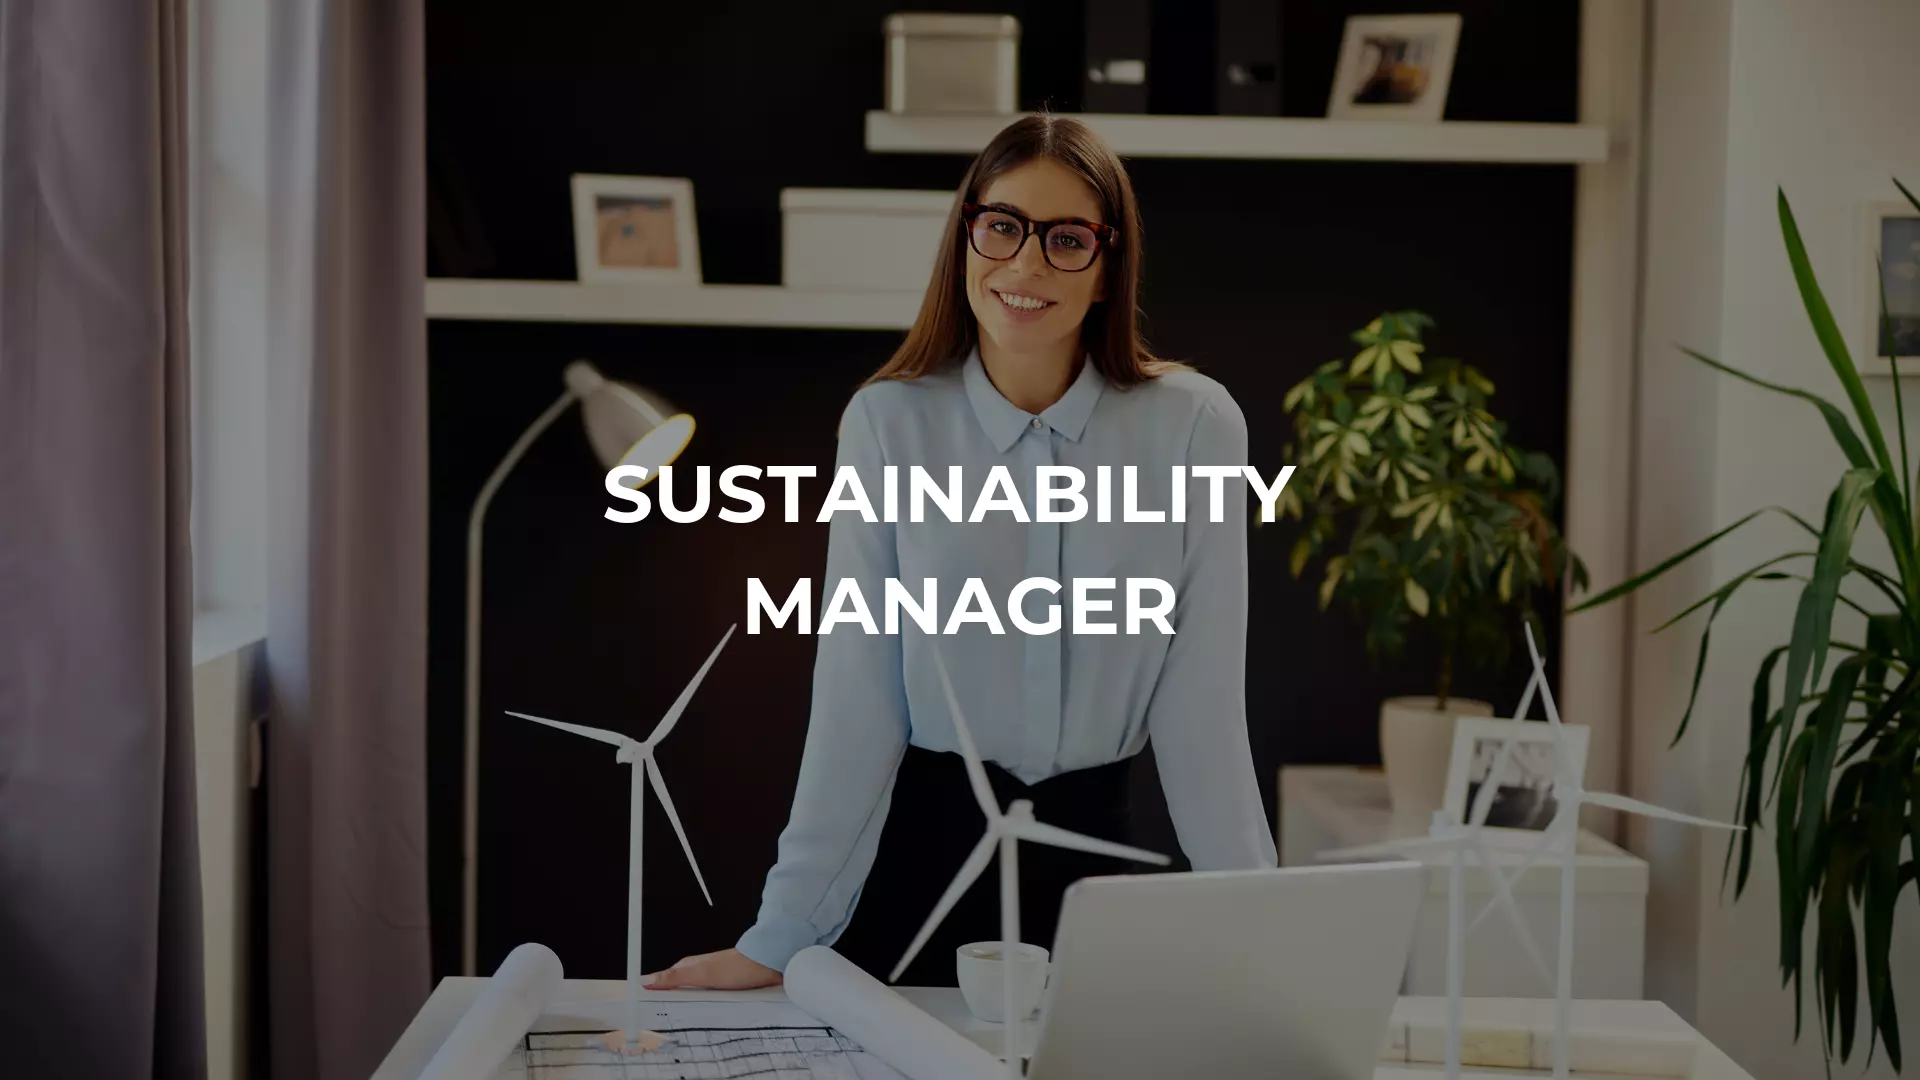 corso-sustainability-manager